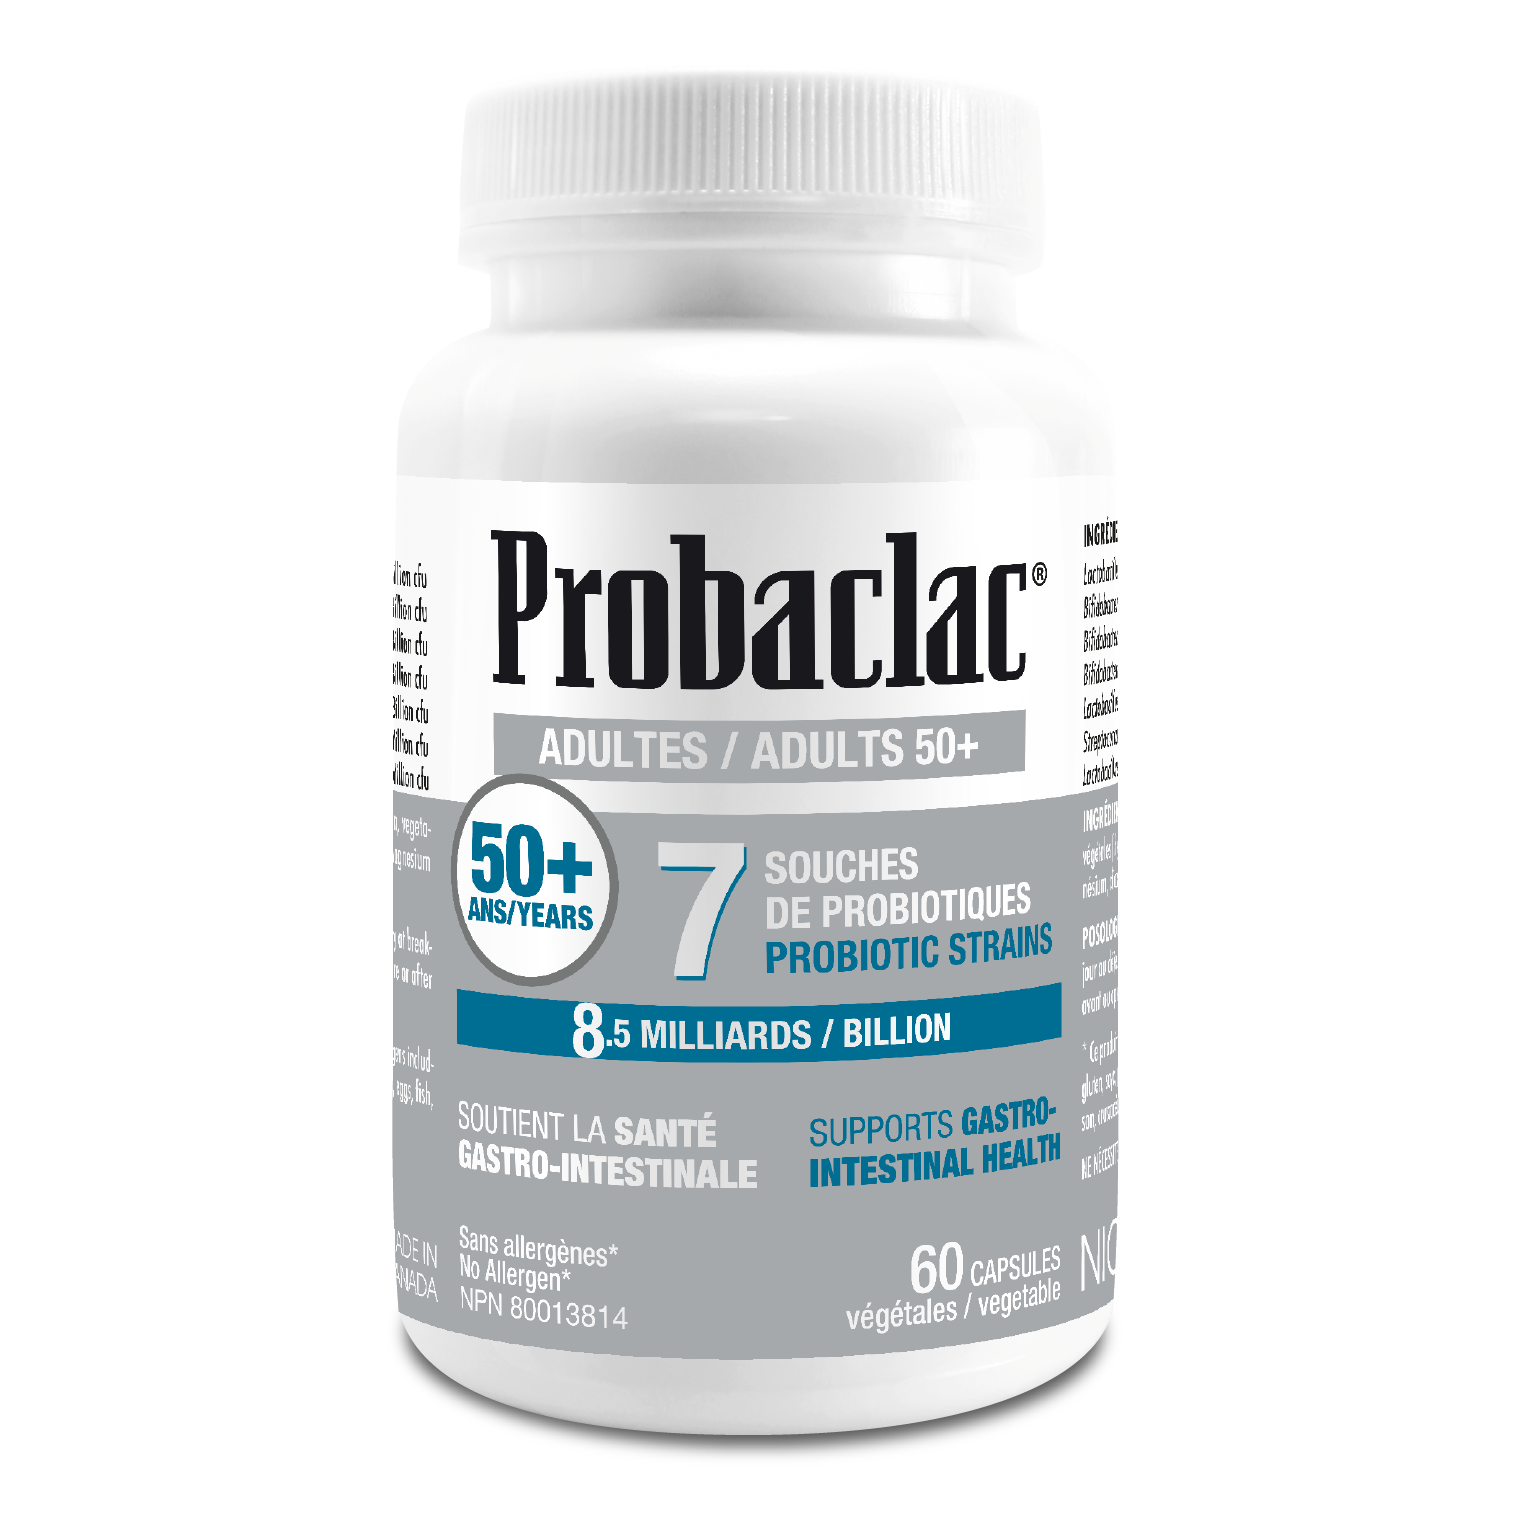 Probiotics for 50 year old and more Probaclac